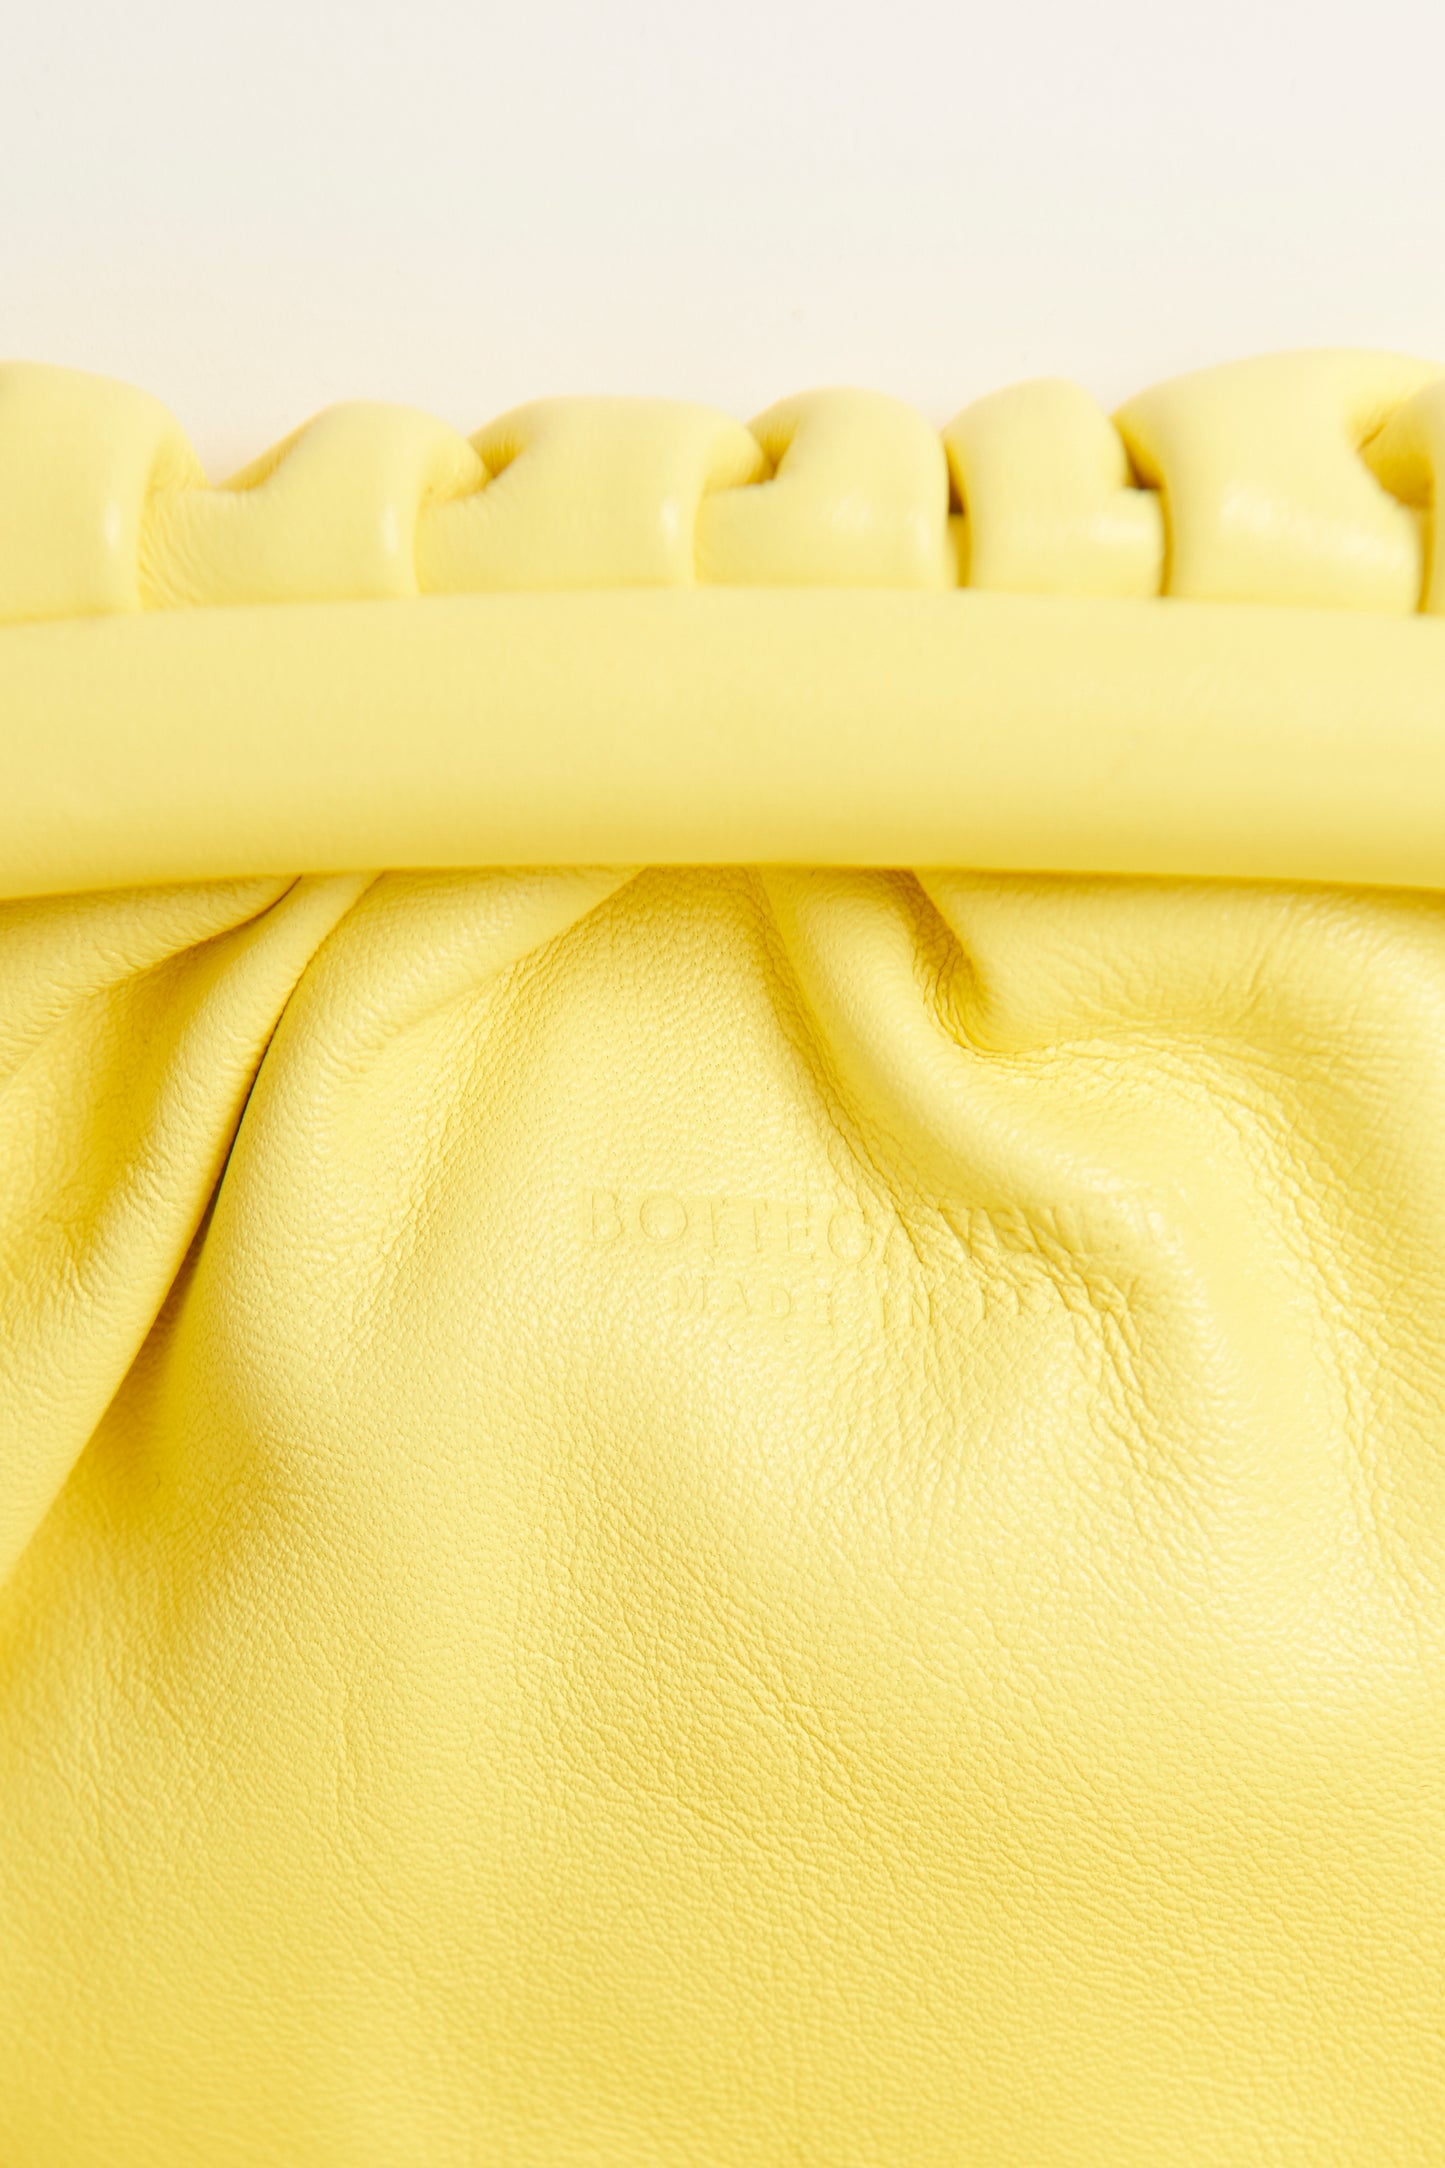 Yellow Leather The Pouch Mini Preowned Handbag